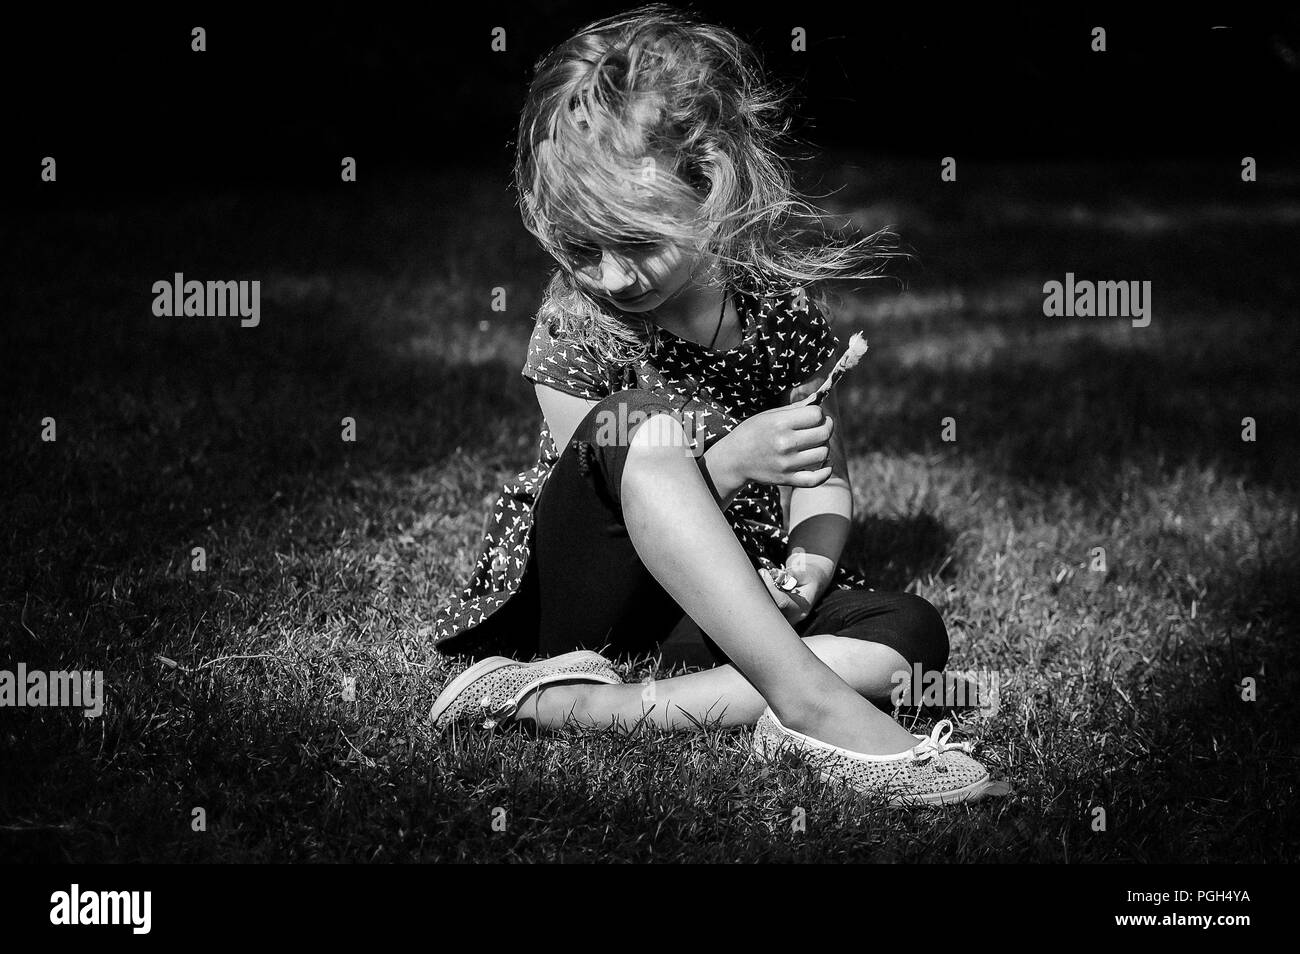 Funny Surprised Little Blonde Girl Screaming in the Park. Outdoors Portrait of Happy Acive Female Child. B W Stock Photo